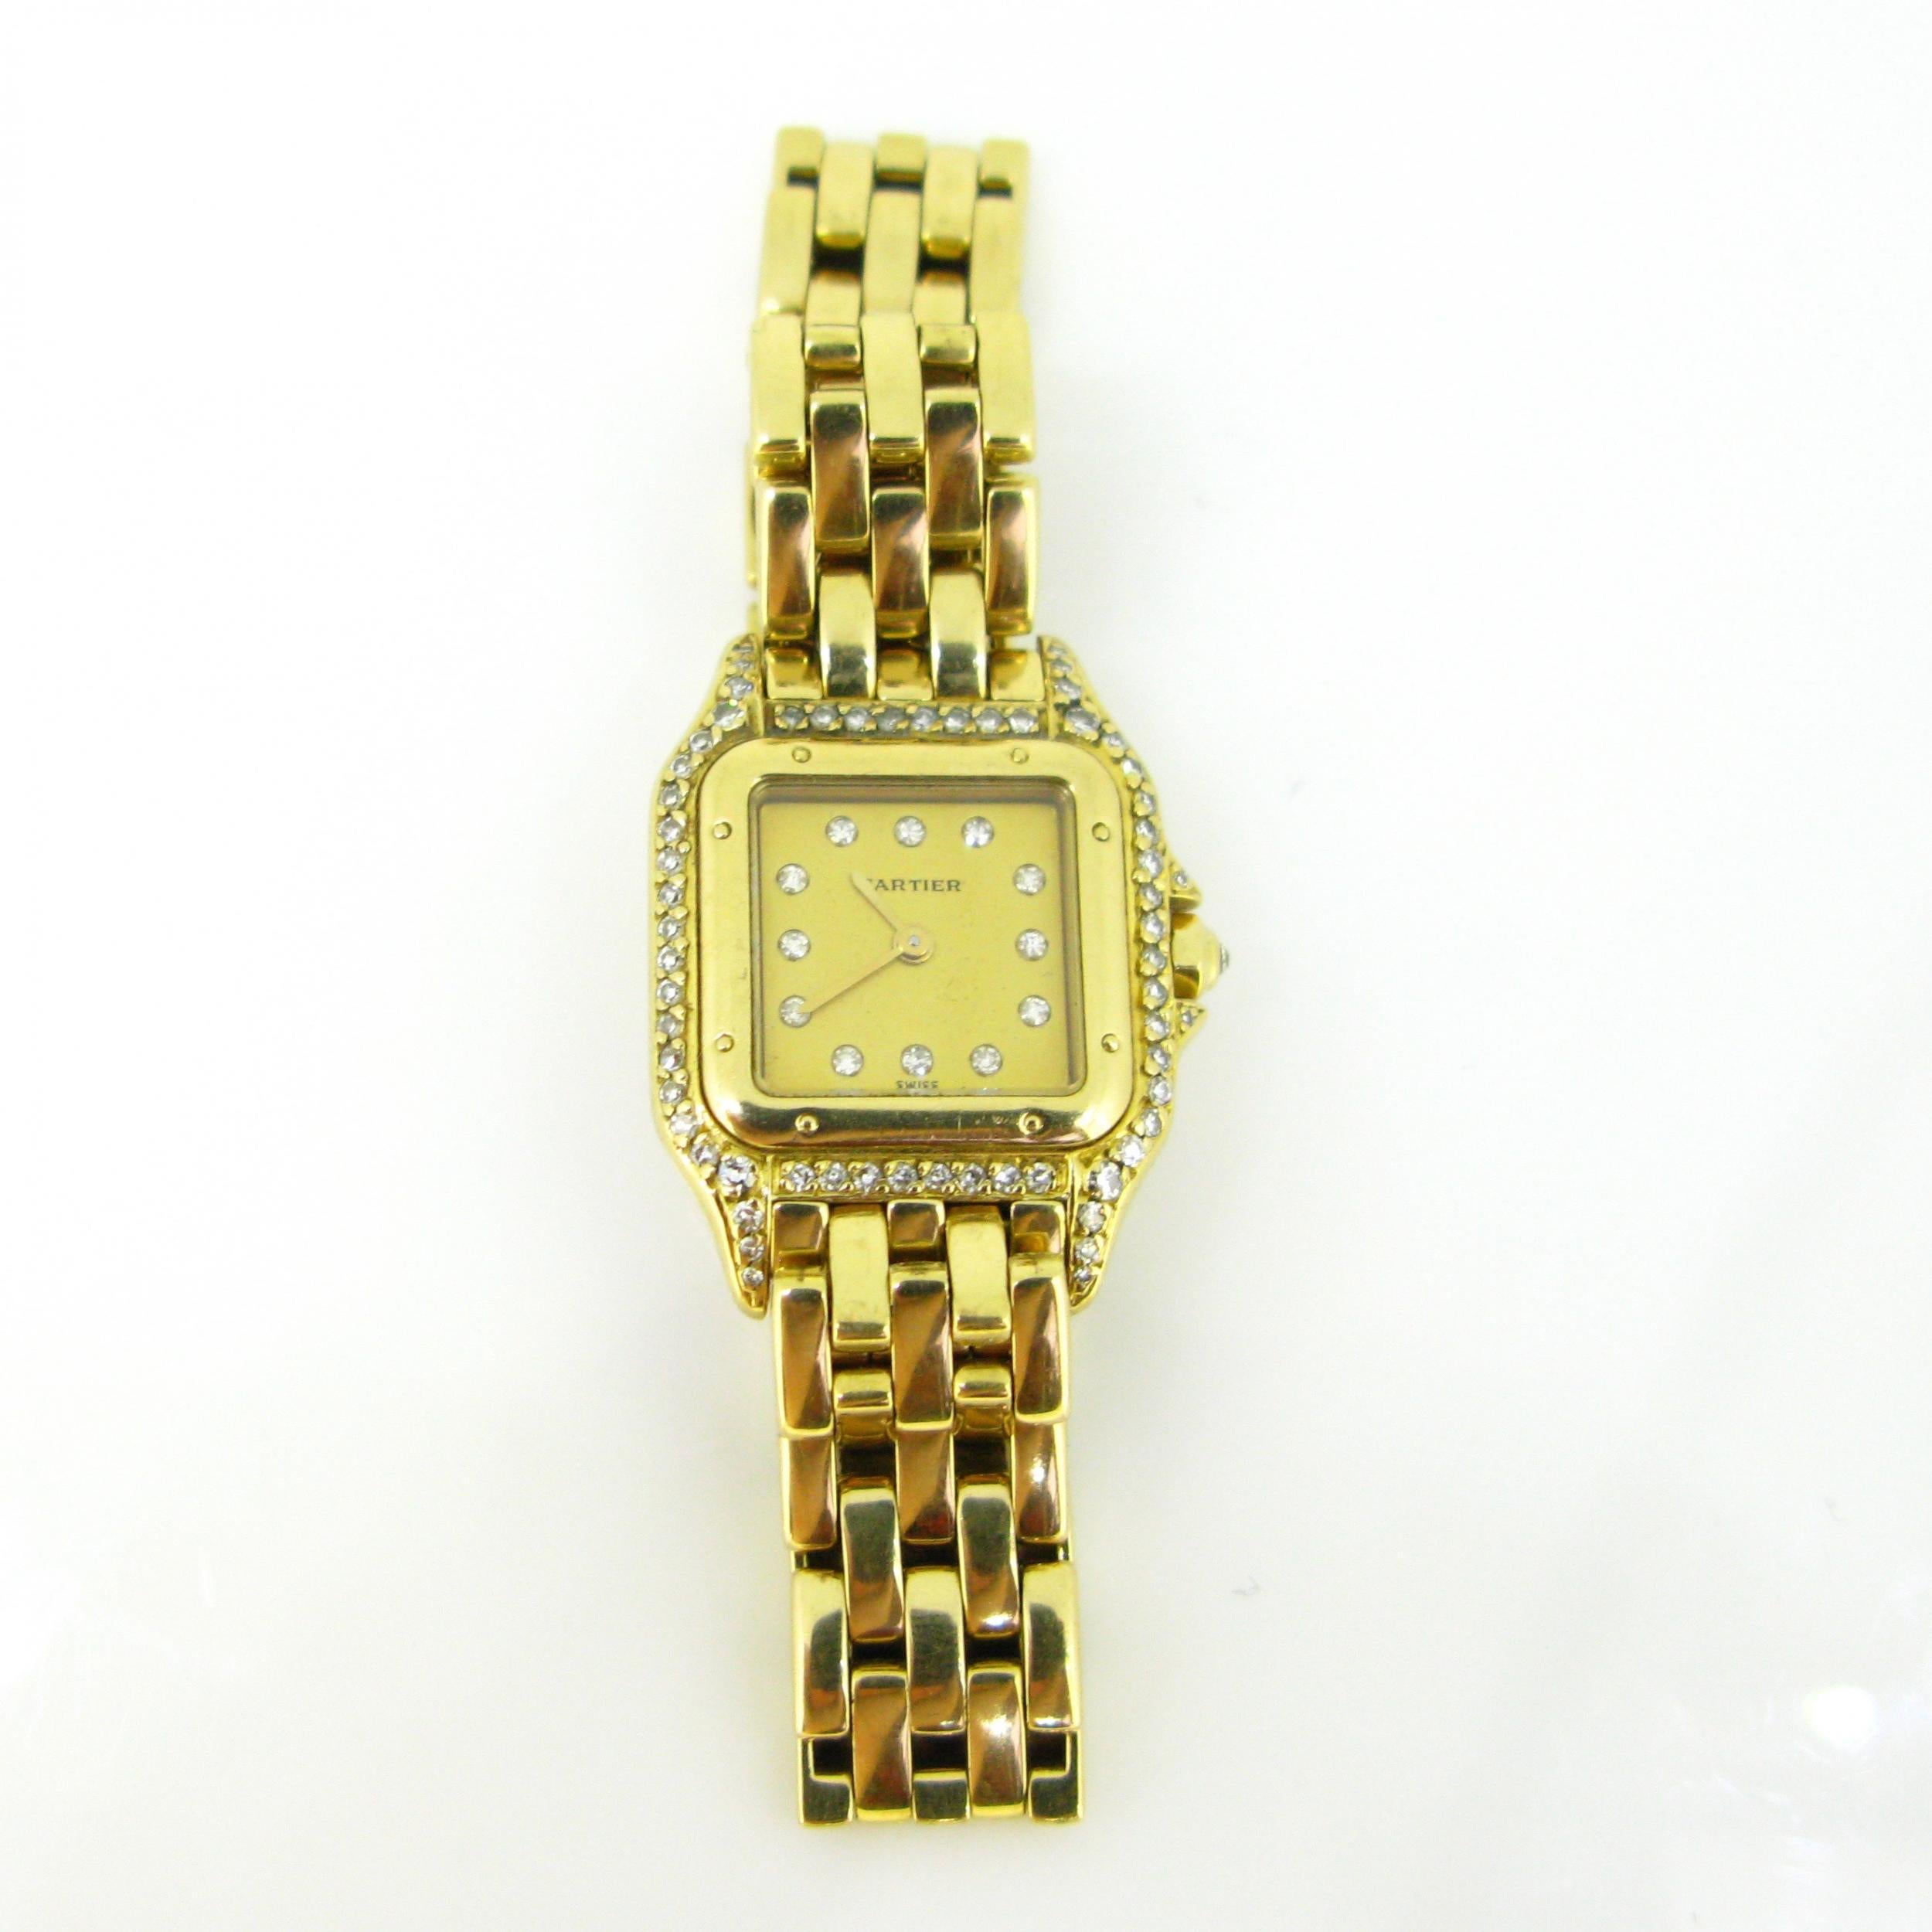 Weight:	63,74gr

Metal:	18k yellow gold 

Stones:	72 Diamonds
•	Cut: 	Single Cut
•	Total carat weight:	1ct approximately

Signature:	Cartier
•	Reference:	8669193516


Movement:	Quartz


Condition:	Very Good


Comments: 	This Panthere Cartier small